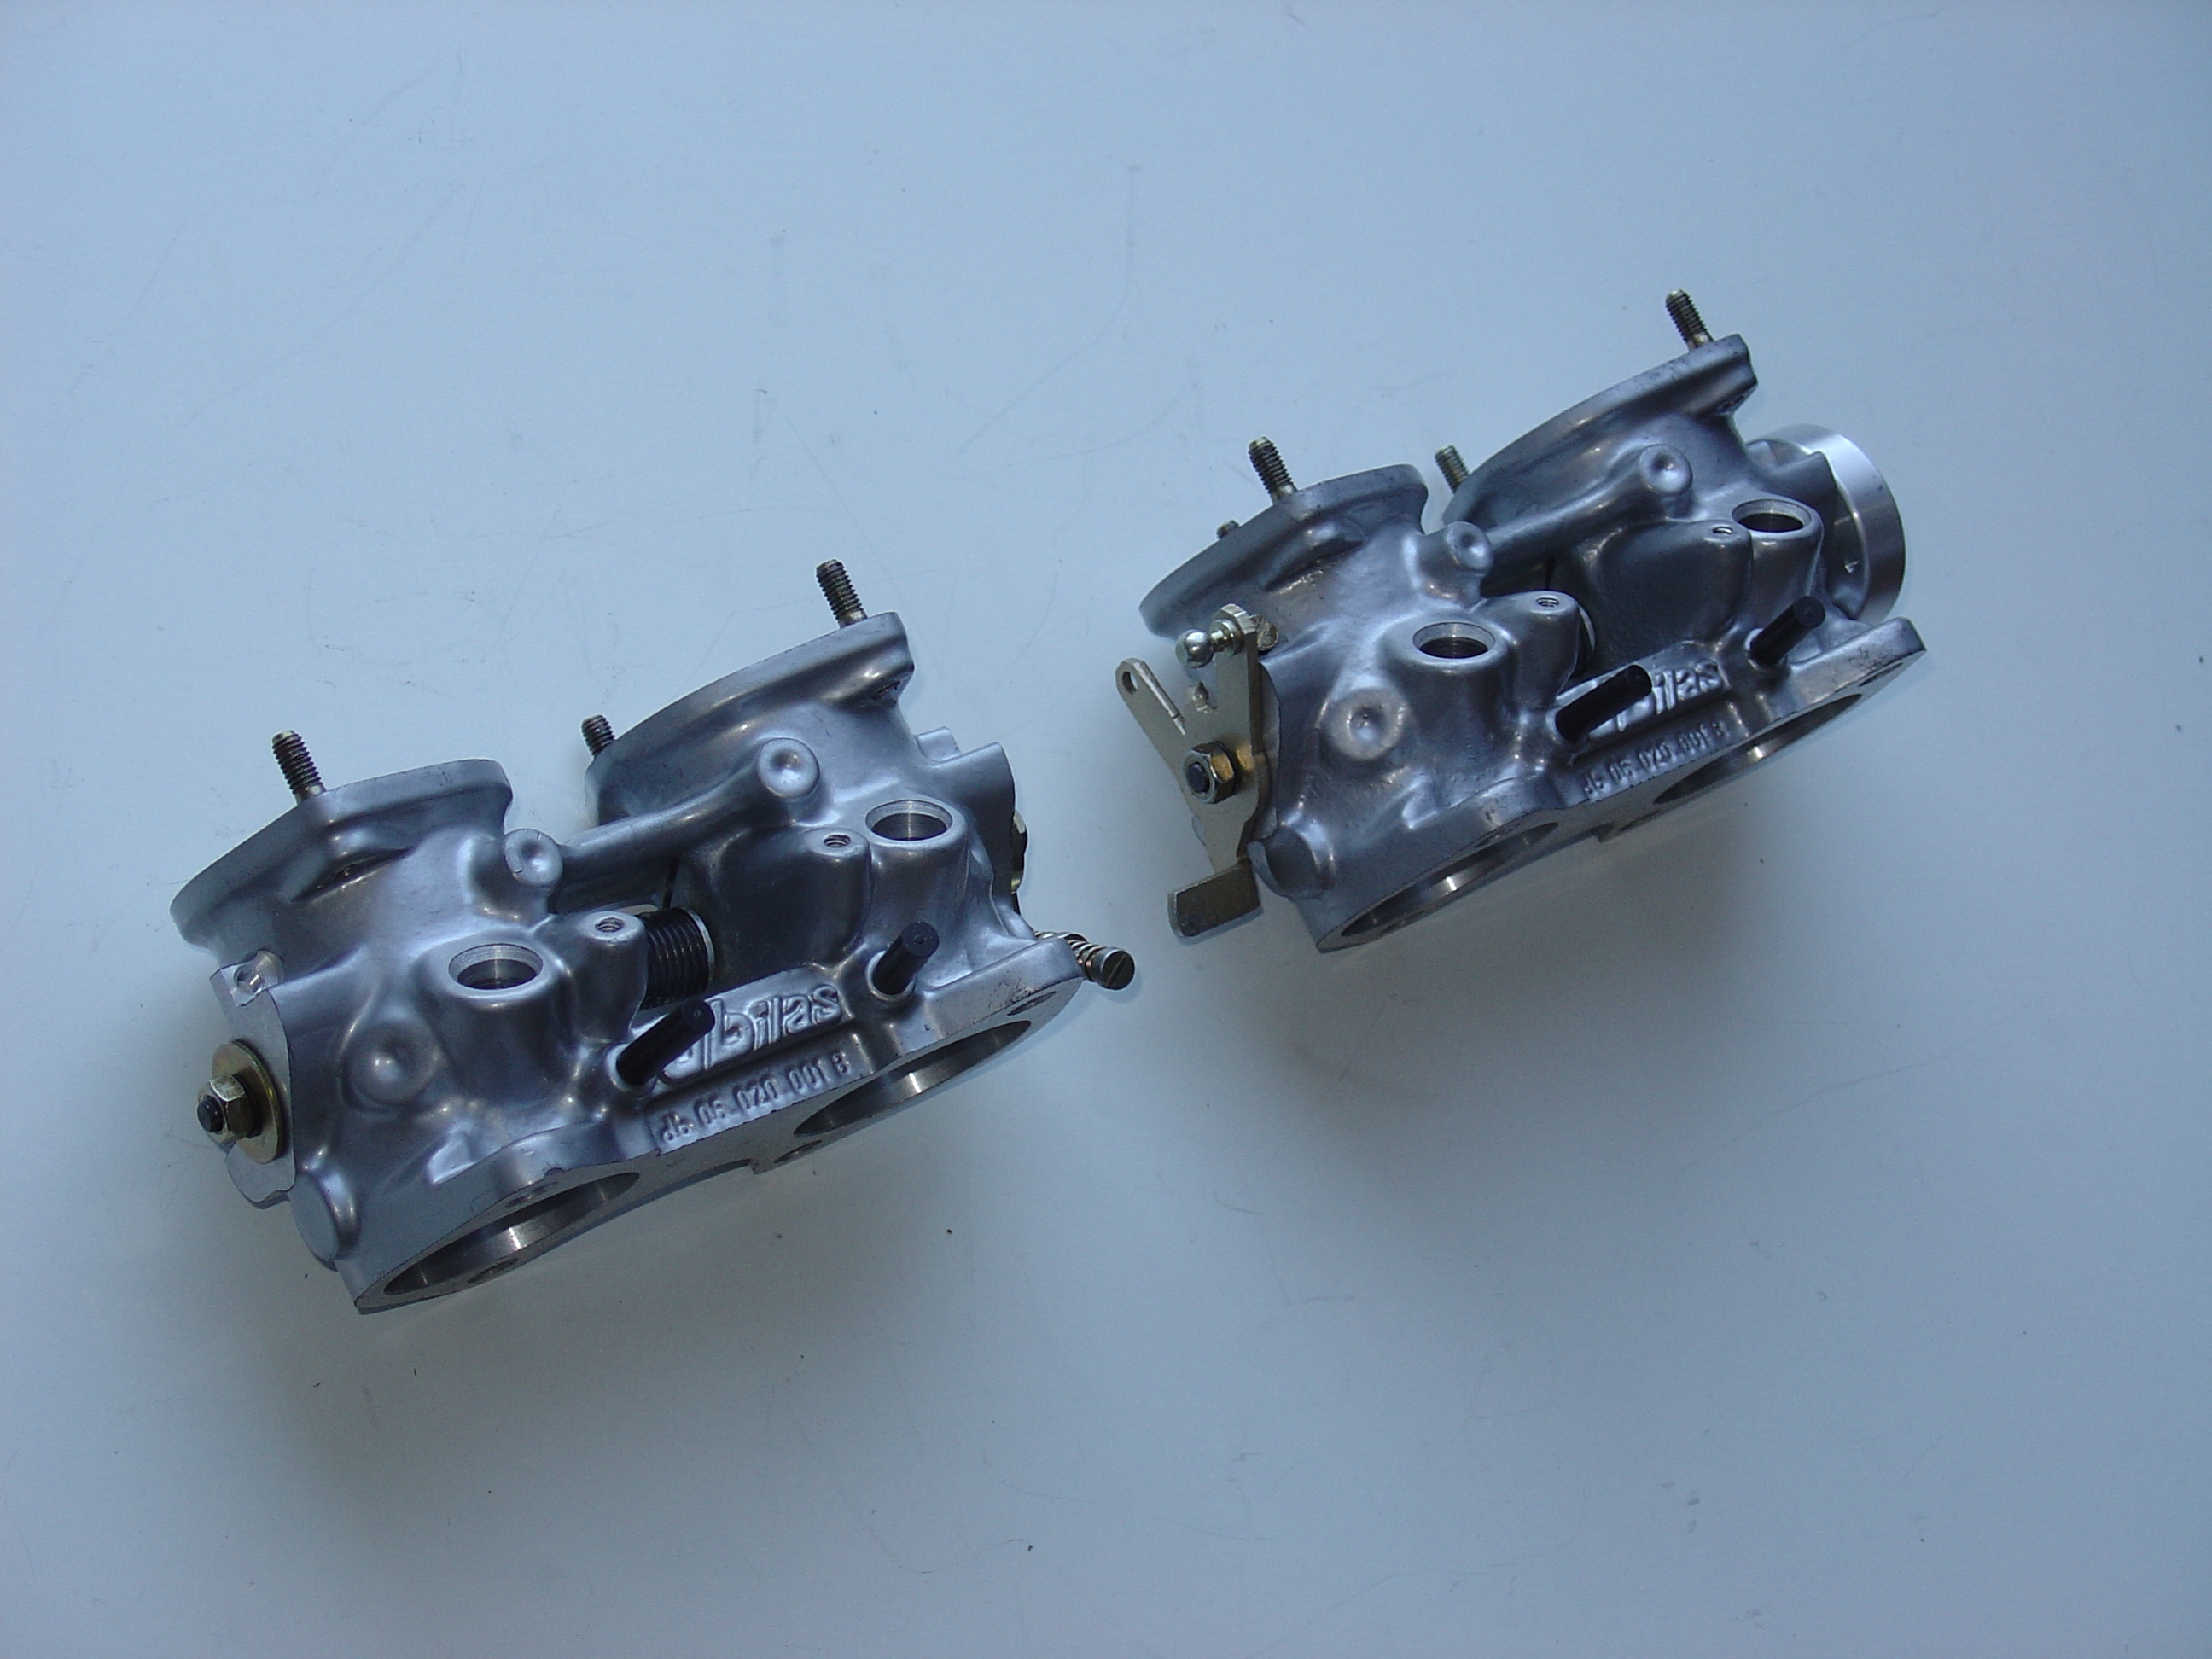 Throttle bodies 48 mm  Diameter: 48mm / Leight: 80mm  with Flange / with Drill holes